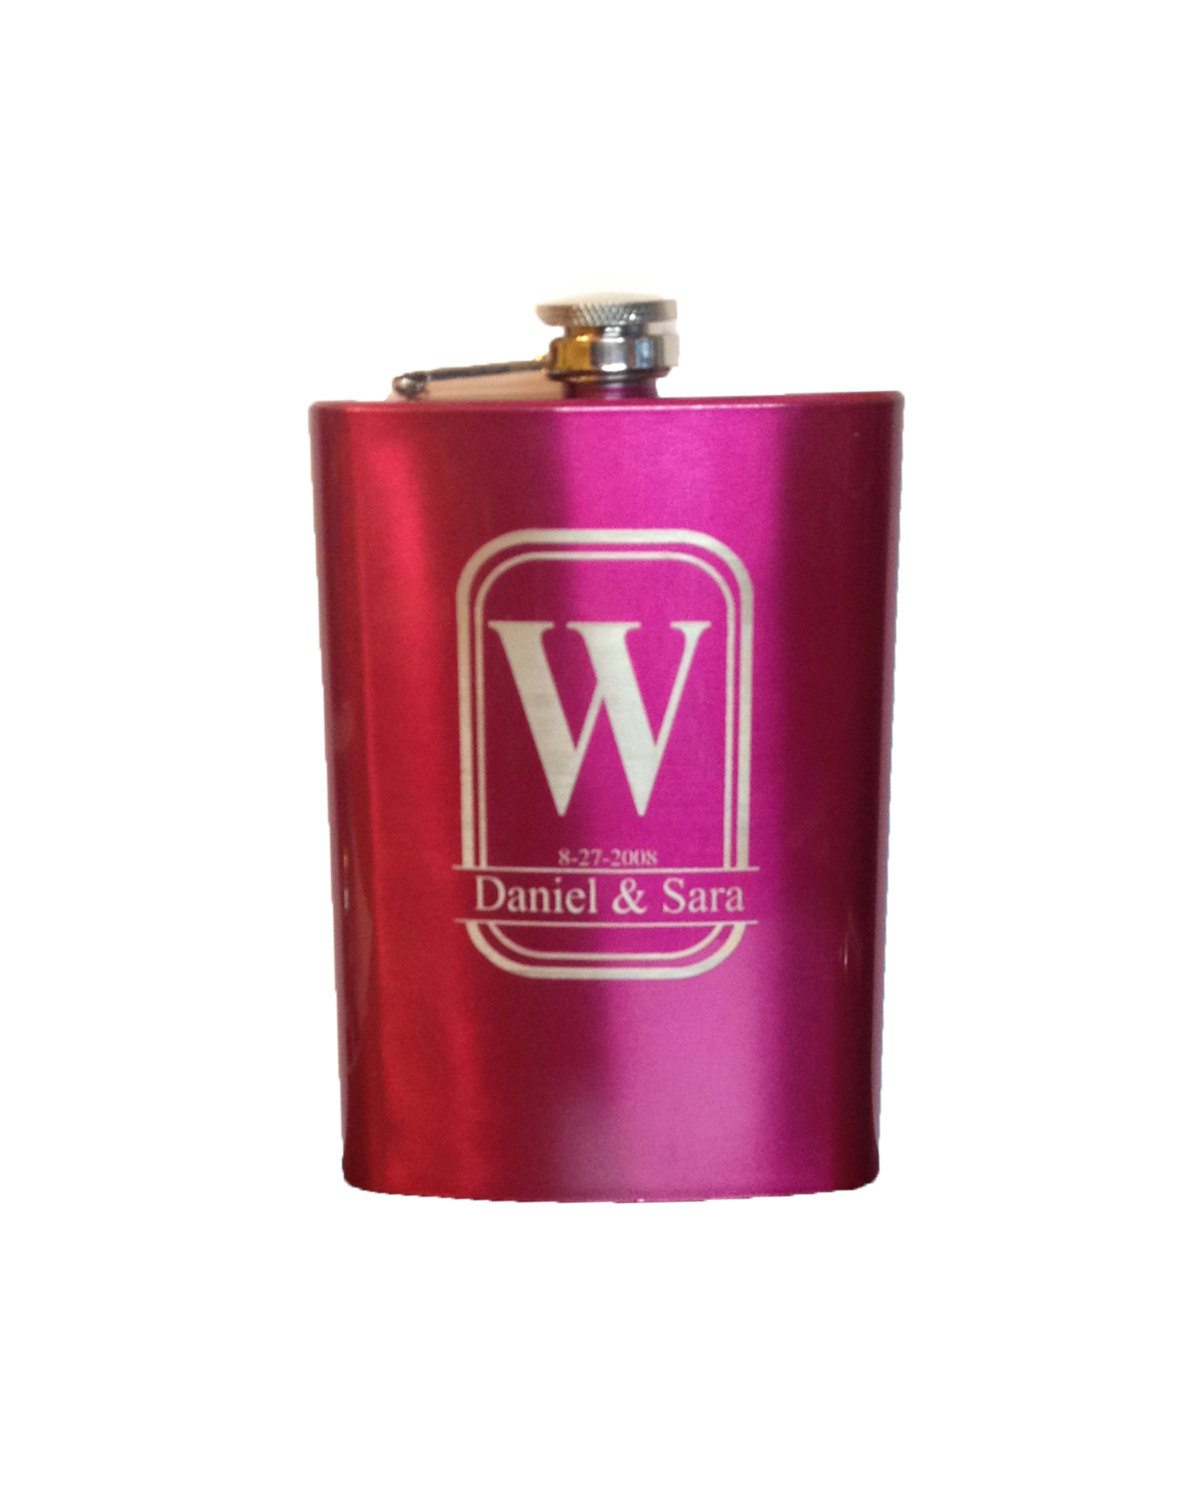 6 8 Oz Etched Pink Engraved Flask Stainless Steel High Gloss Engraved Personalized Groomsman Gift Bridesmaid Gift Wedding Favor